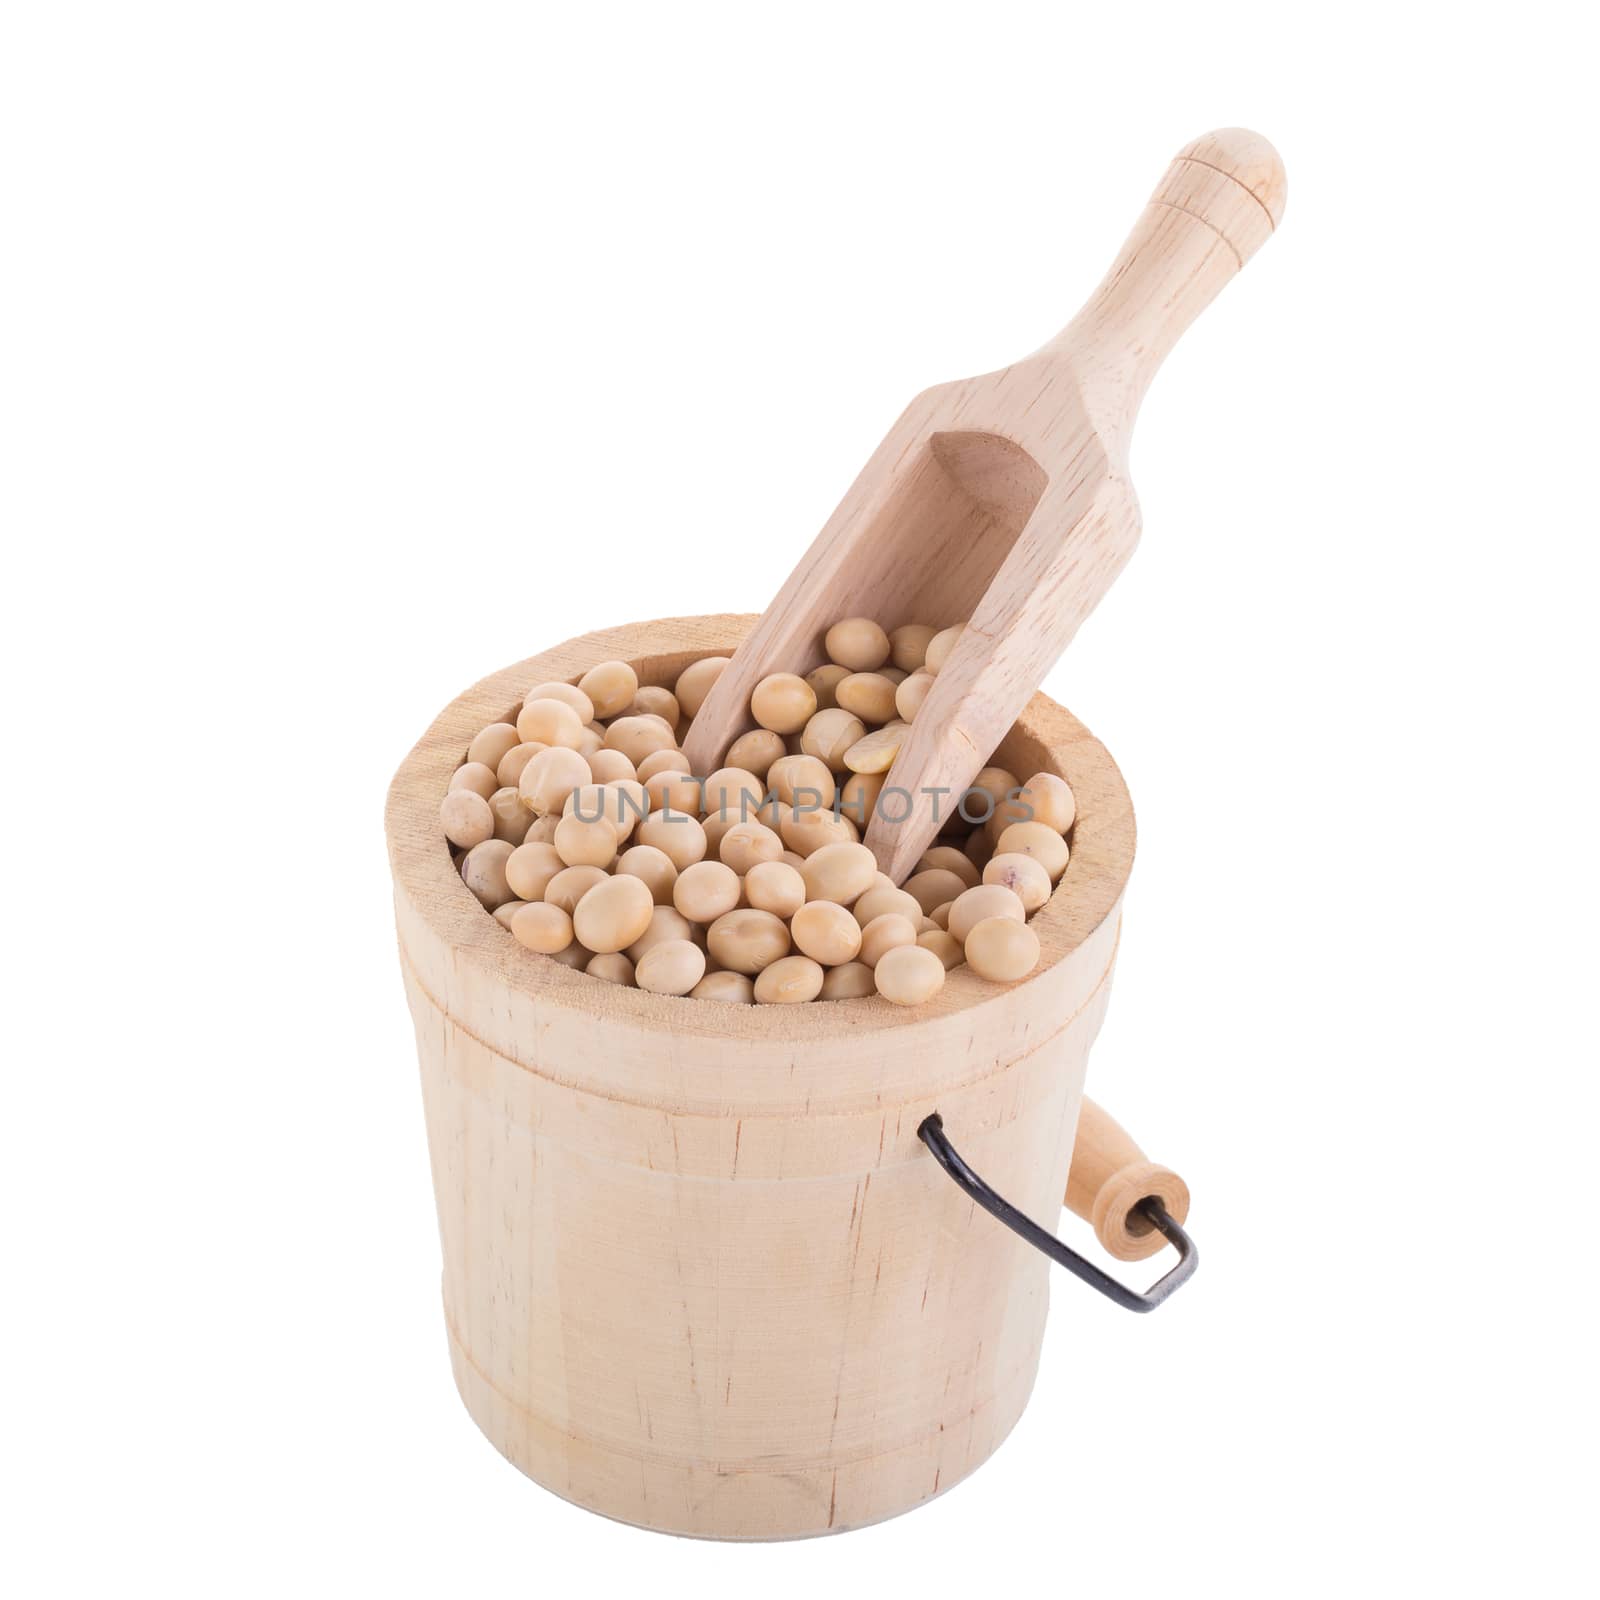 Soybeans in a wooden cup isolated on white background by kaiskynet